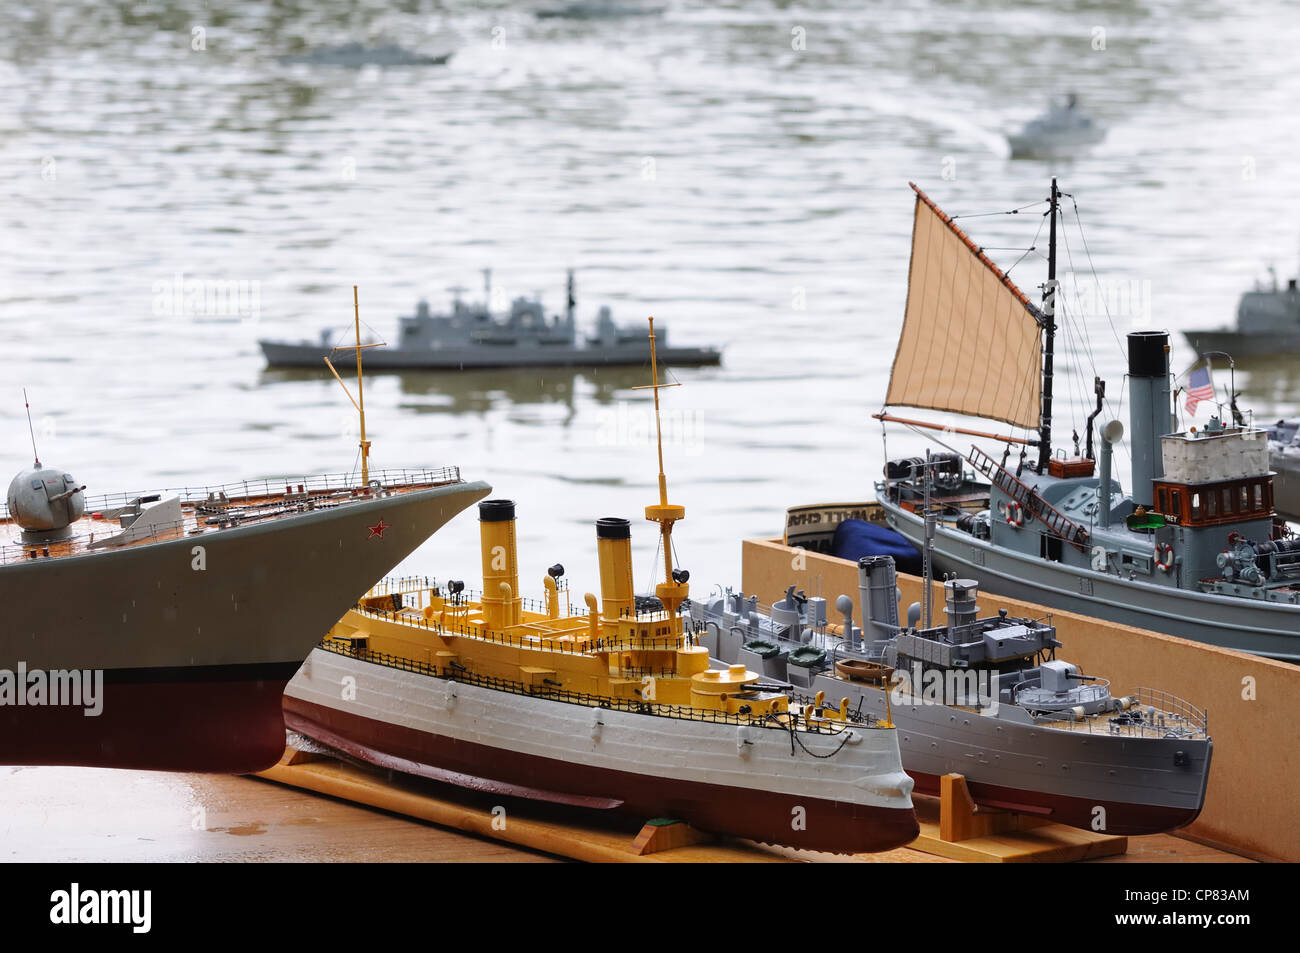 Model ships on display in and around Queen's Park boating pond on Glasgow's southside, Scotland, Uk. Stock Photo